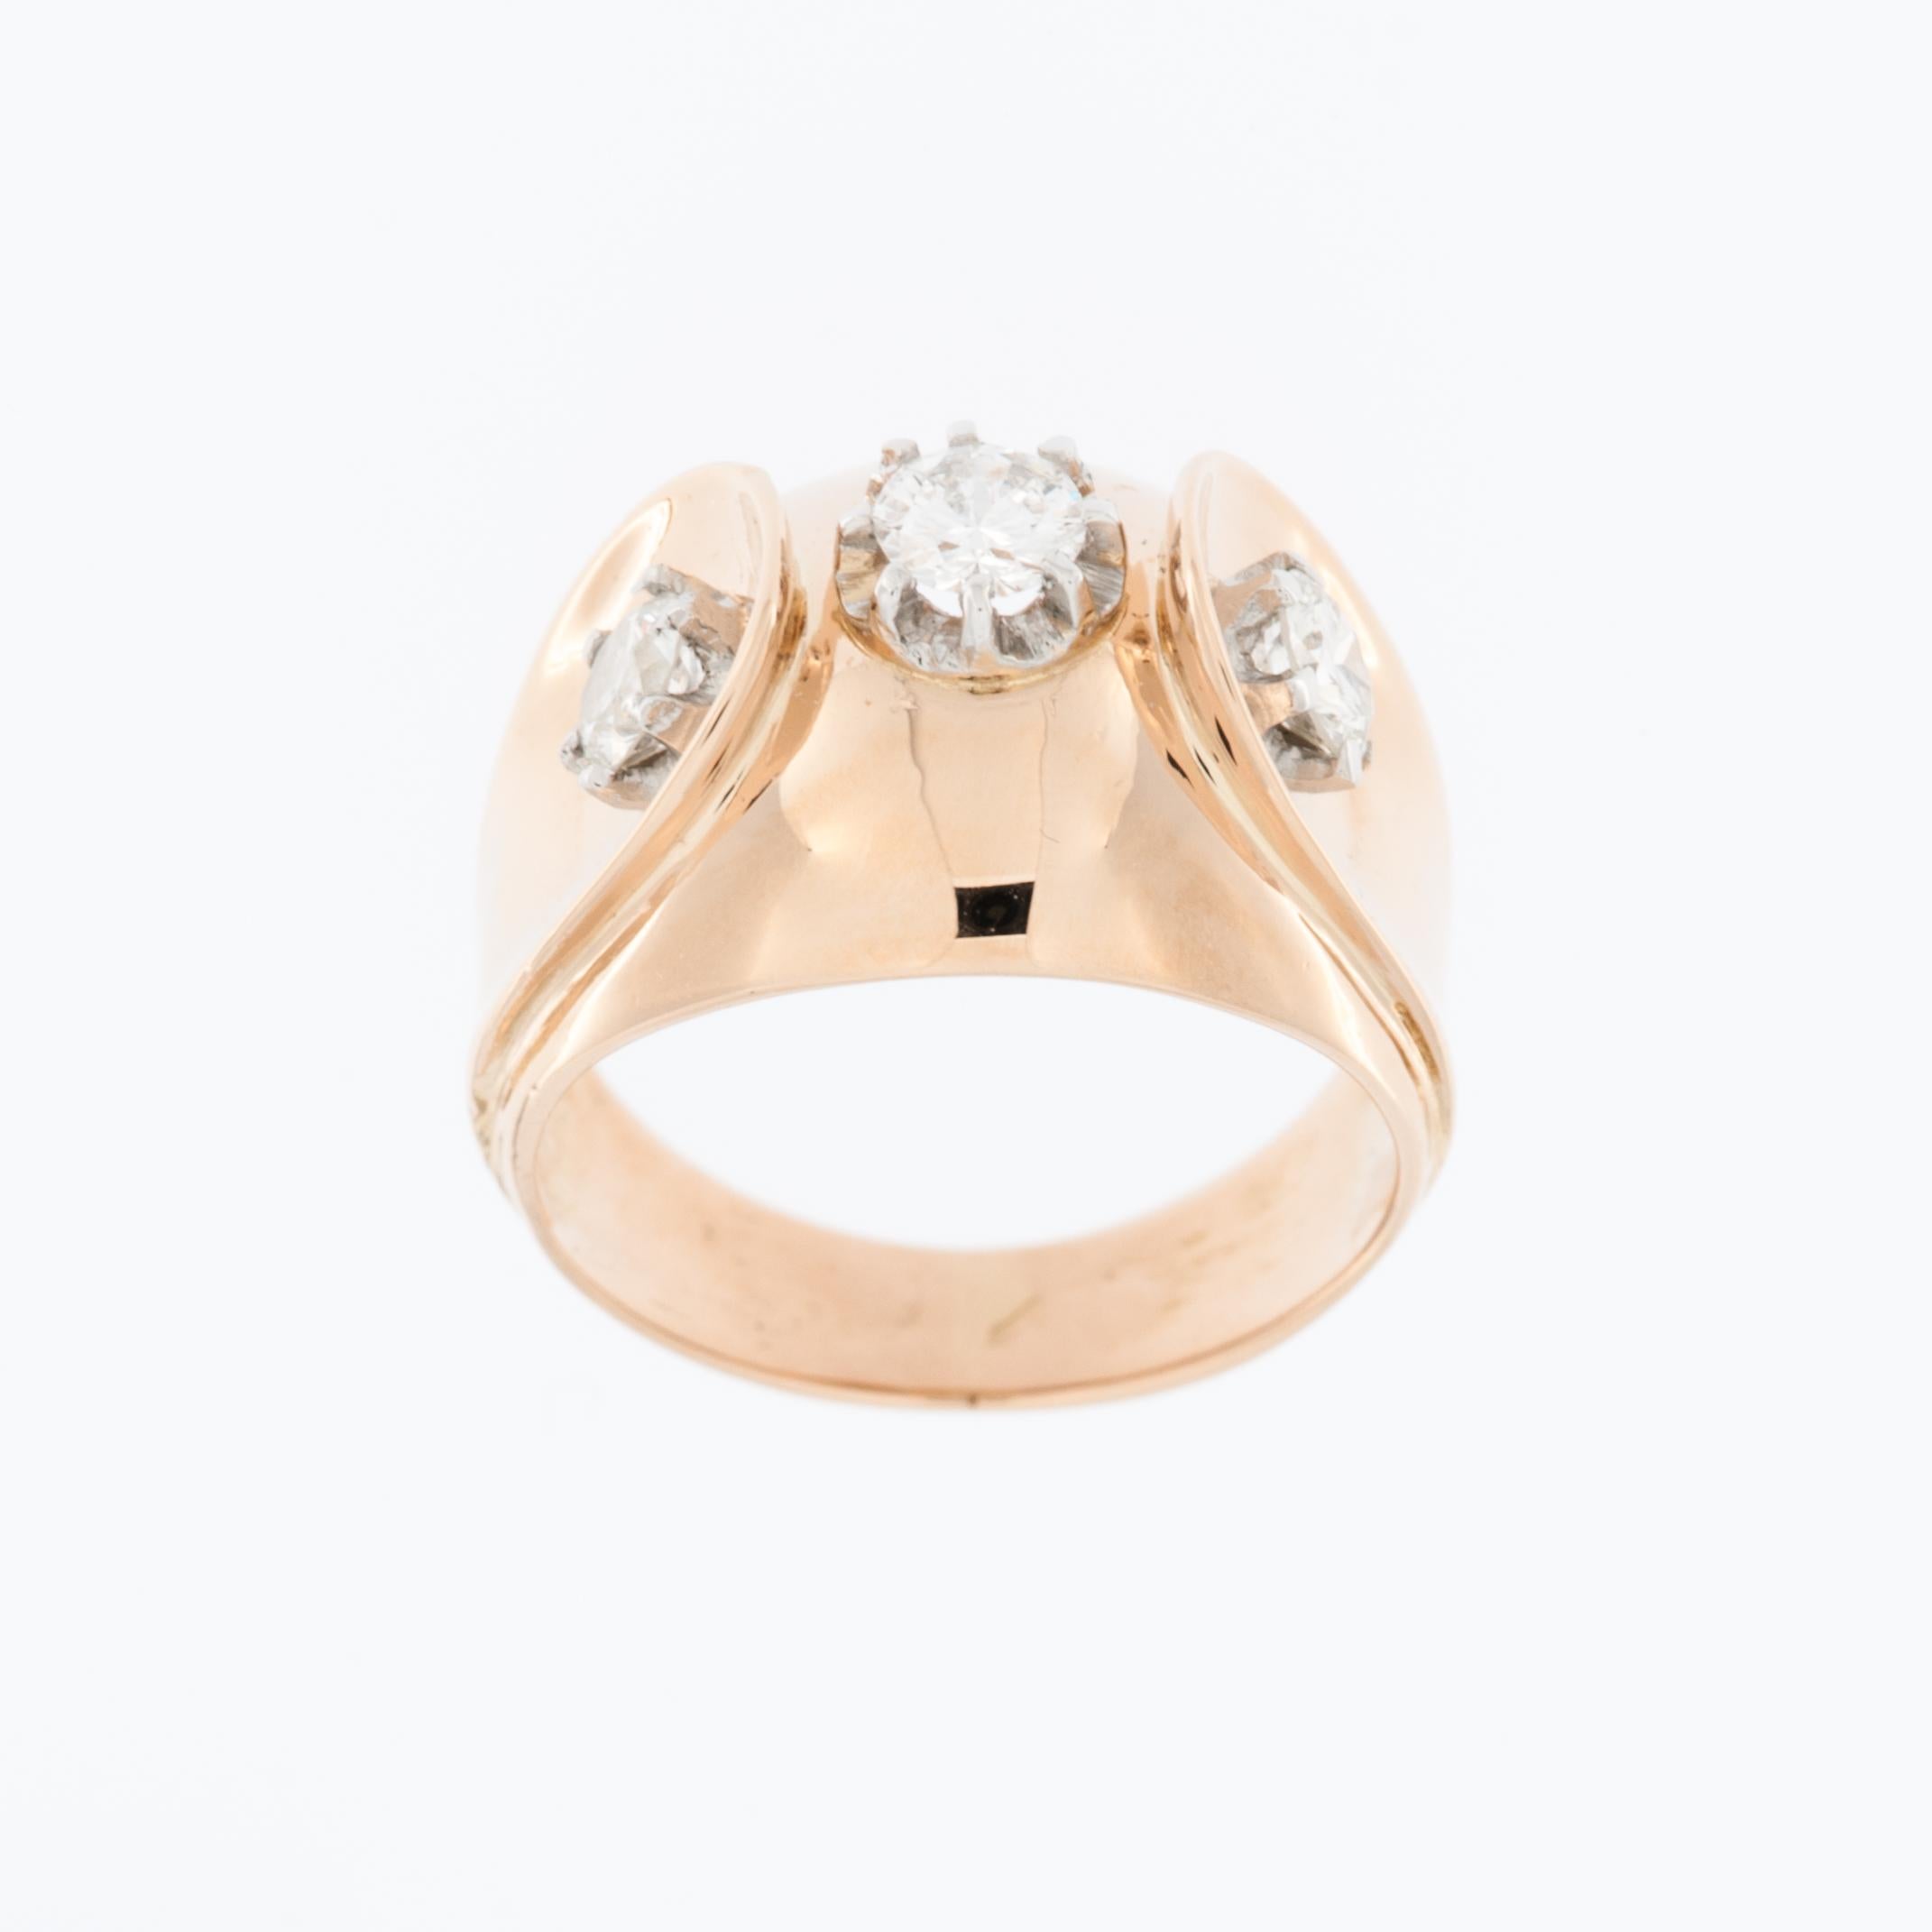 The Antique Style French Rose Gold Ring with Diamonds features a captivating blend of timeless design and luxurious materials. Crafted in the romantic allure of rose gold, this ring exudes a warm and elegant hue that complements various skin